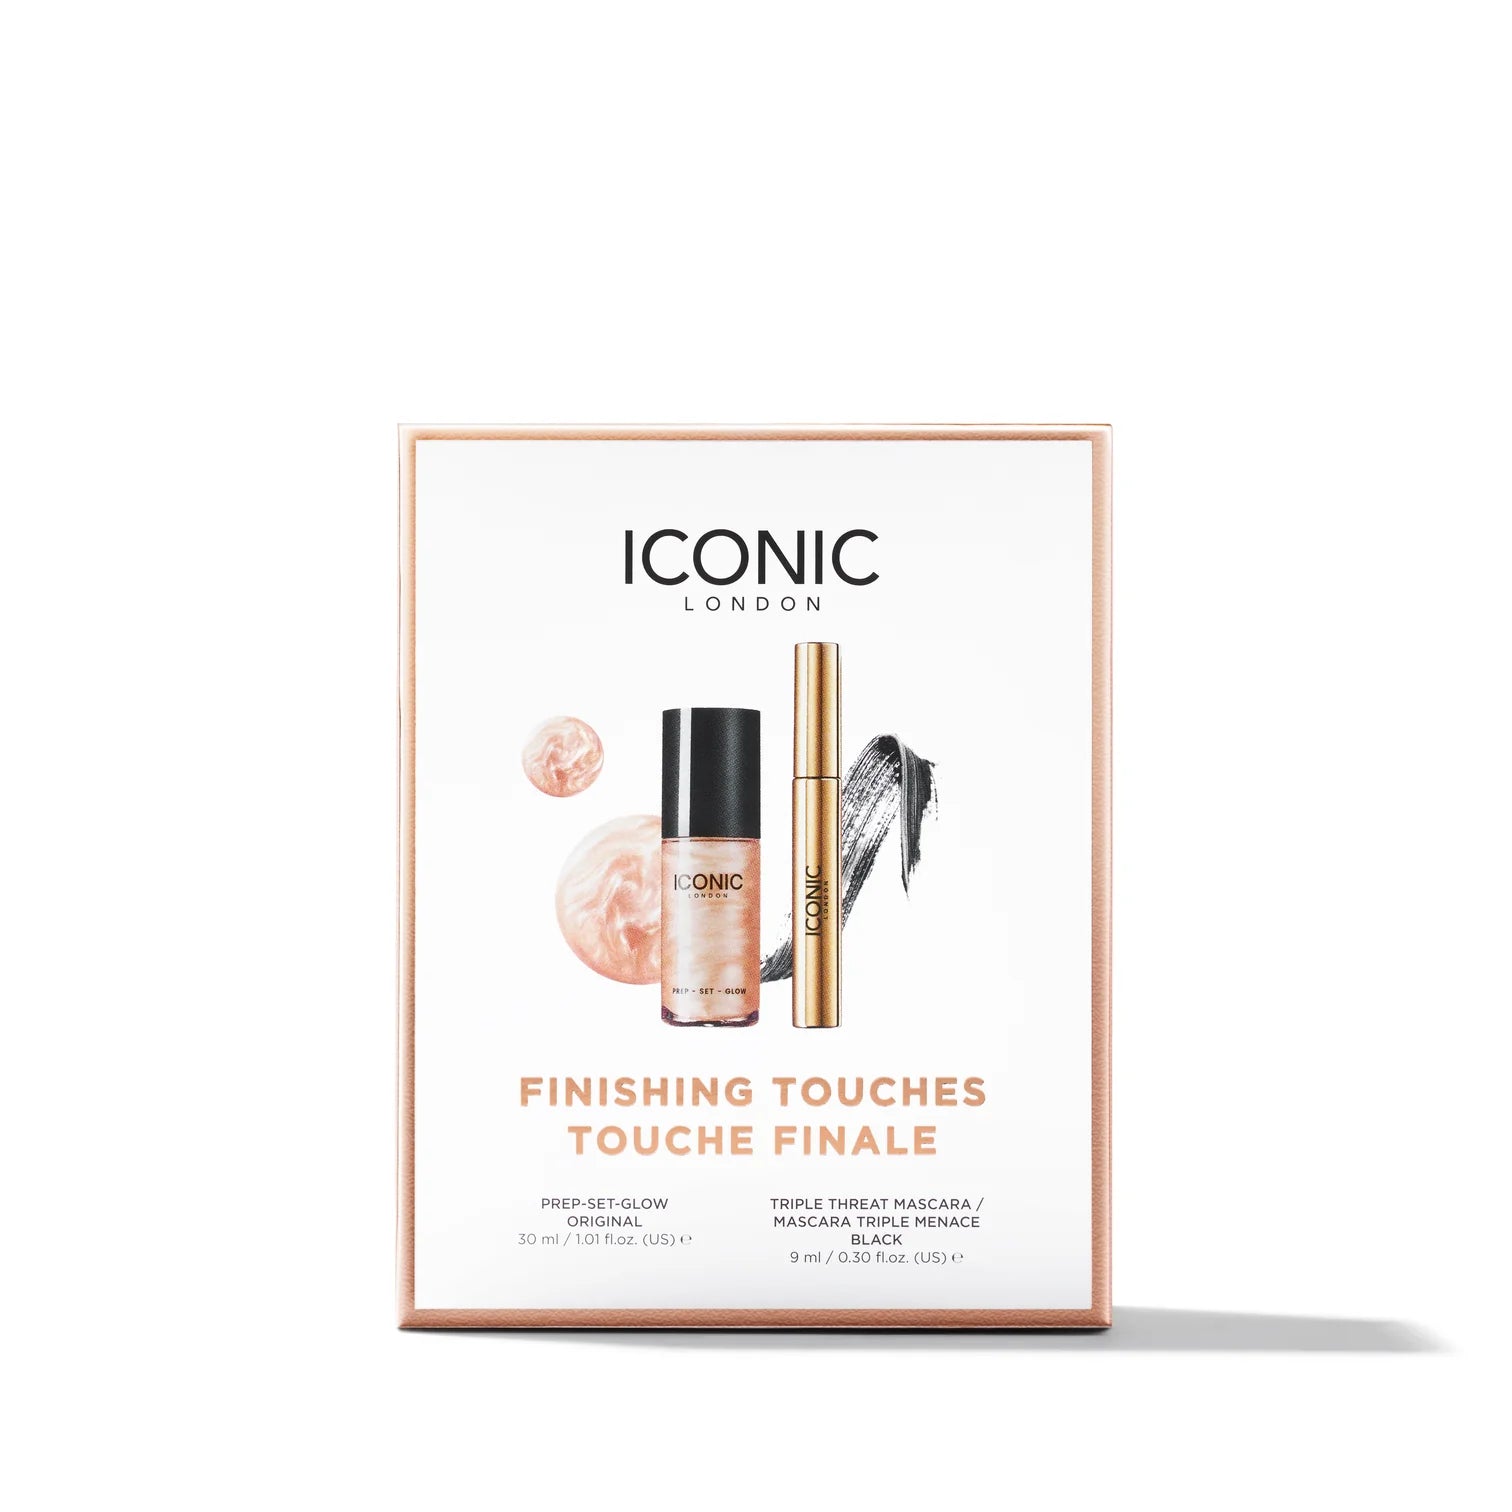 ICONIC London Finishing Touches Gift Set , packaging